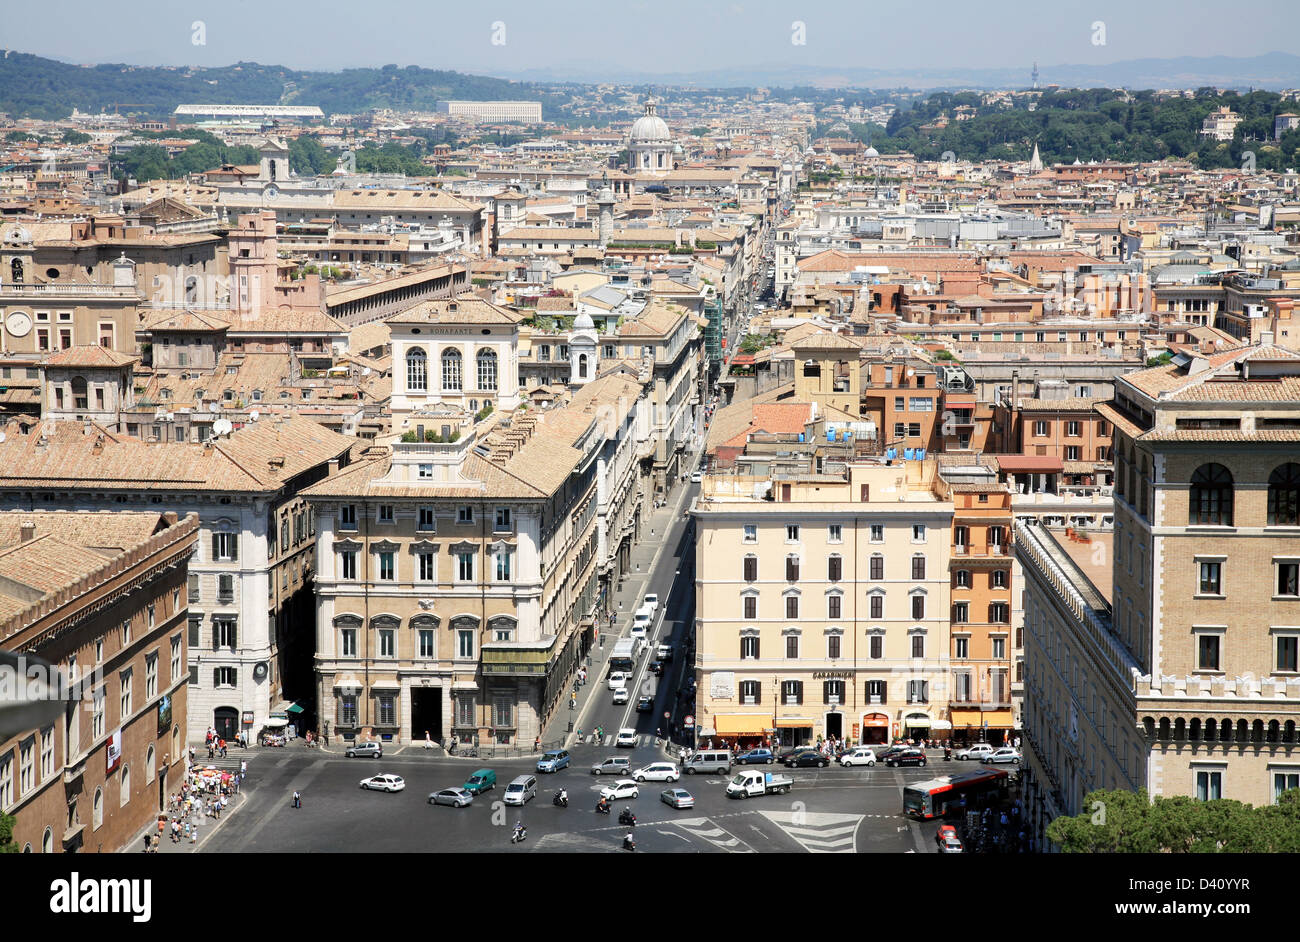 View of Rome in Italy Stock Photo